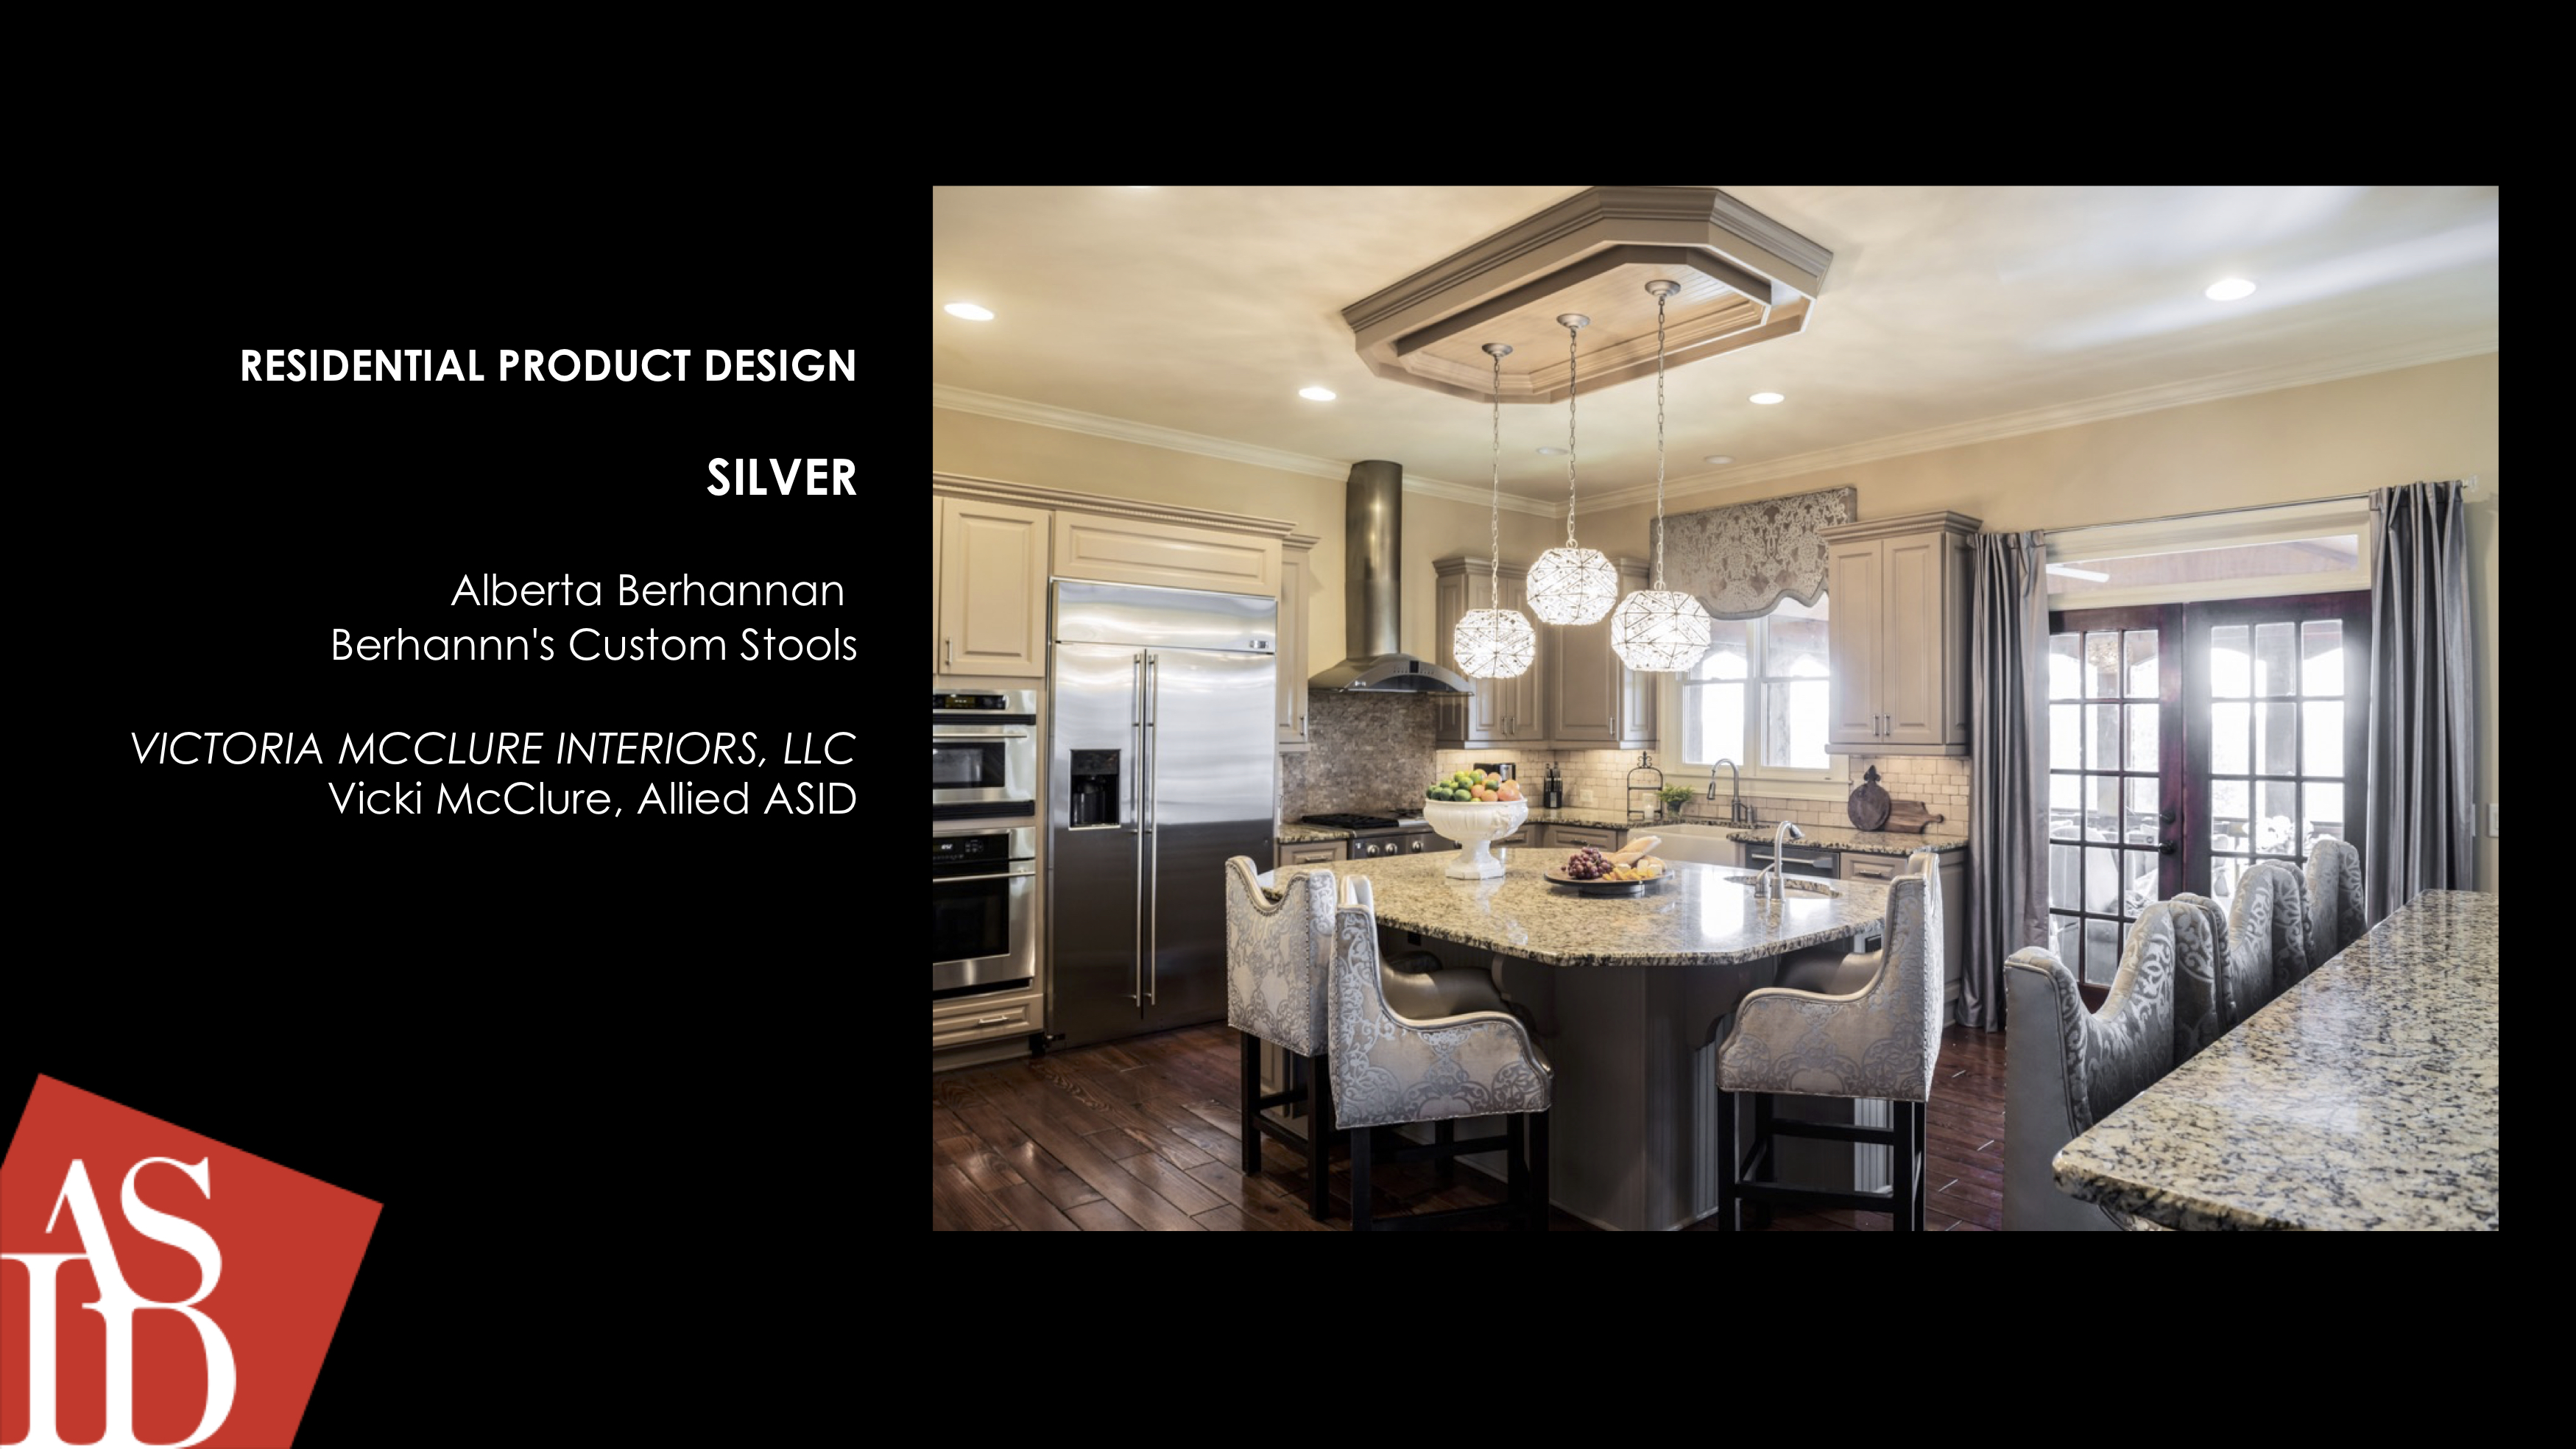 PRODUCT DESIGN | SILVER